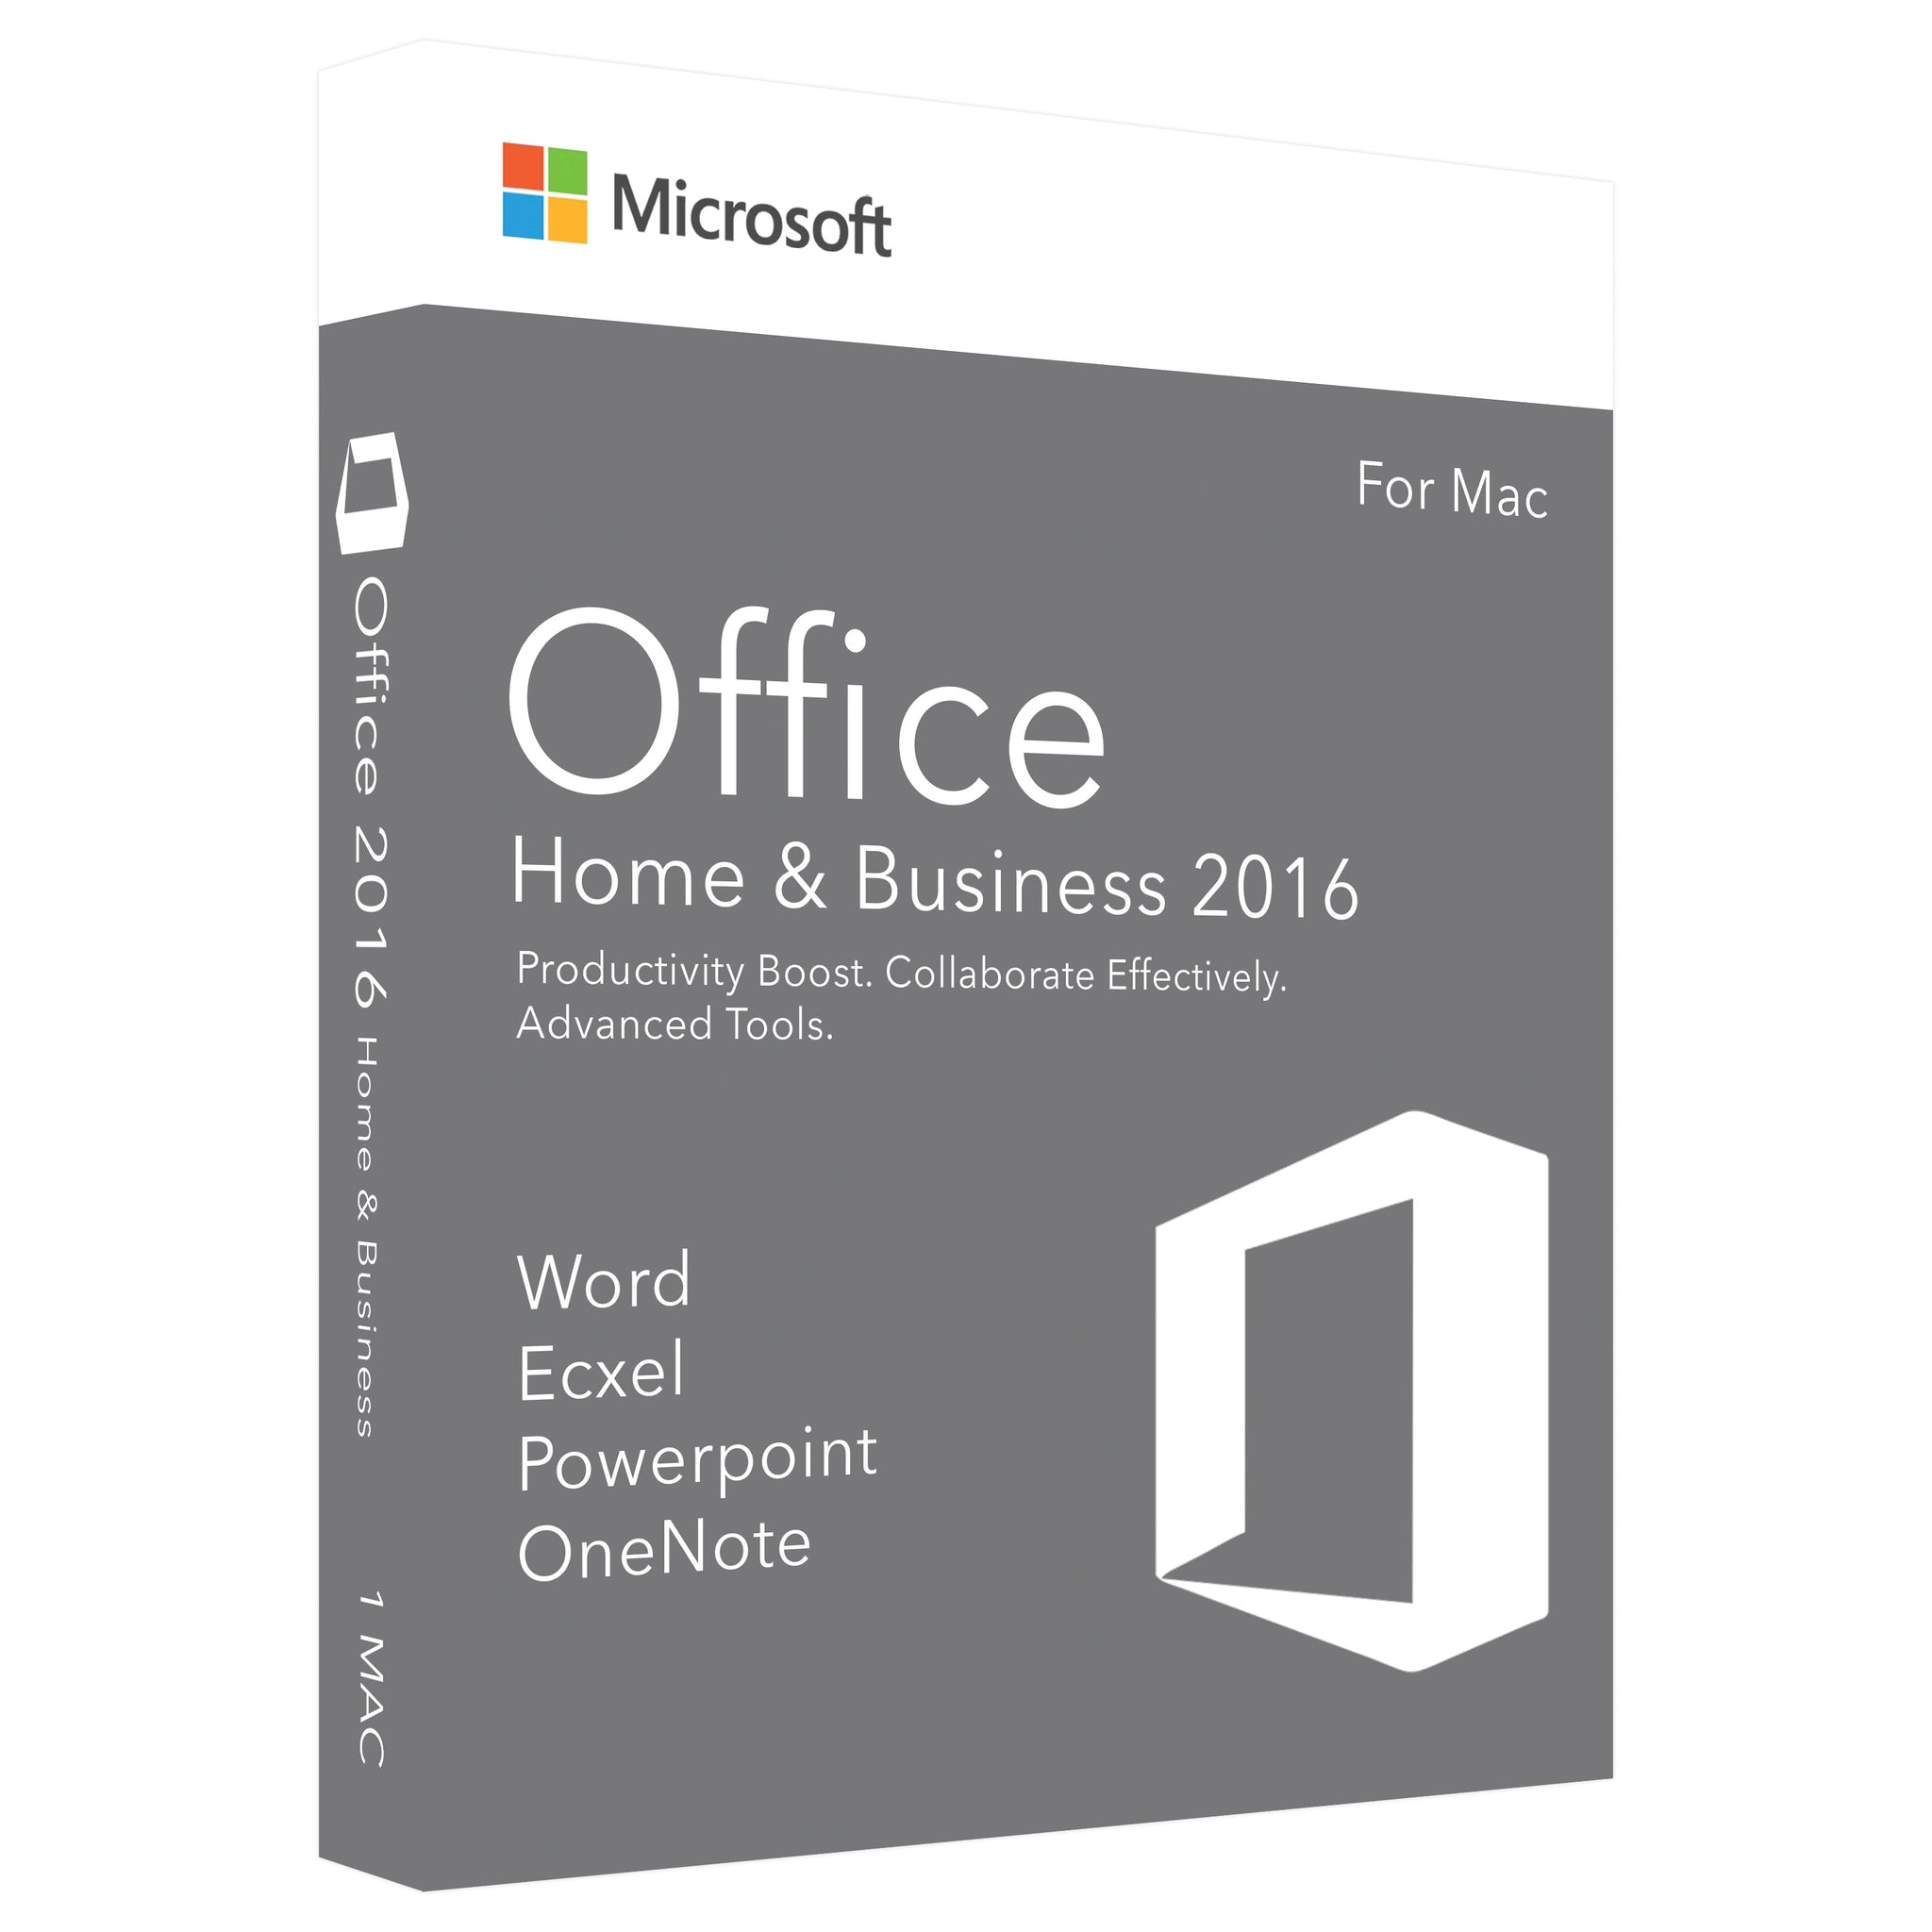 Microsoft Office 2016 Home & Business - Lifetime License Key for 1 MAC